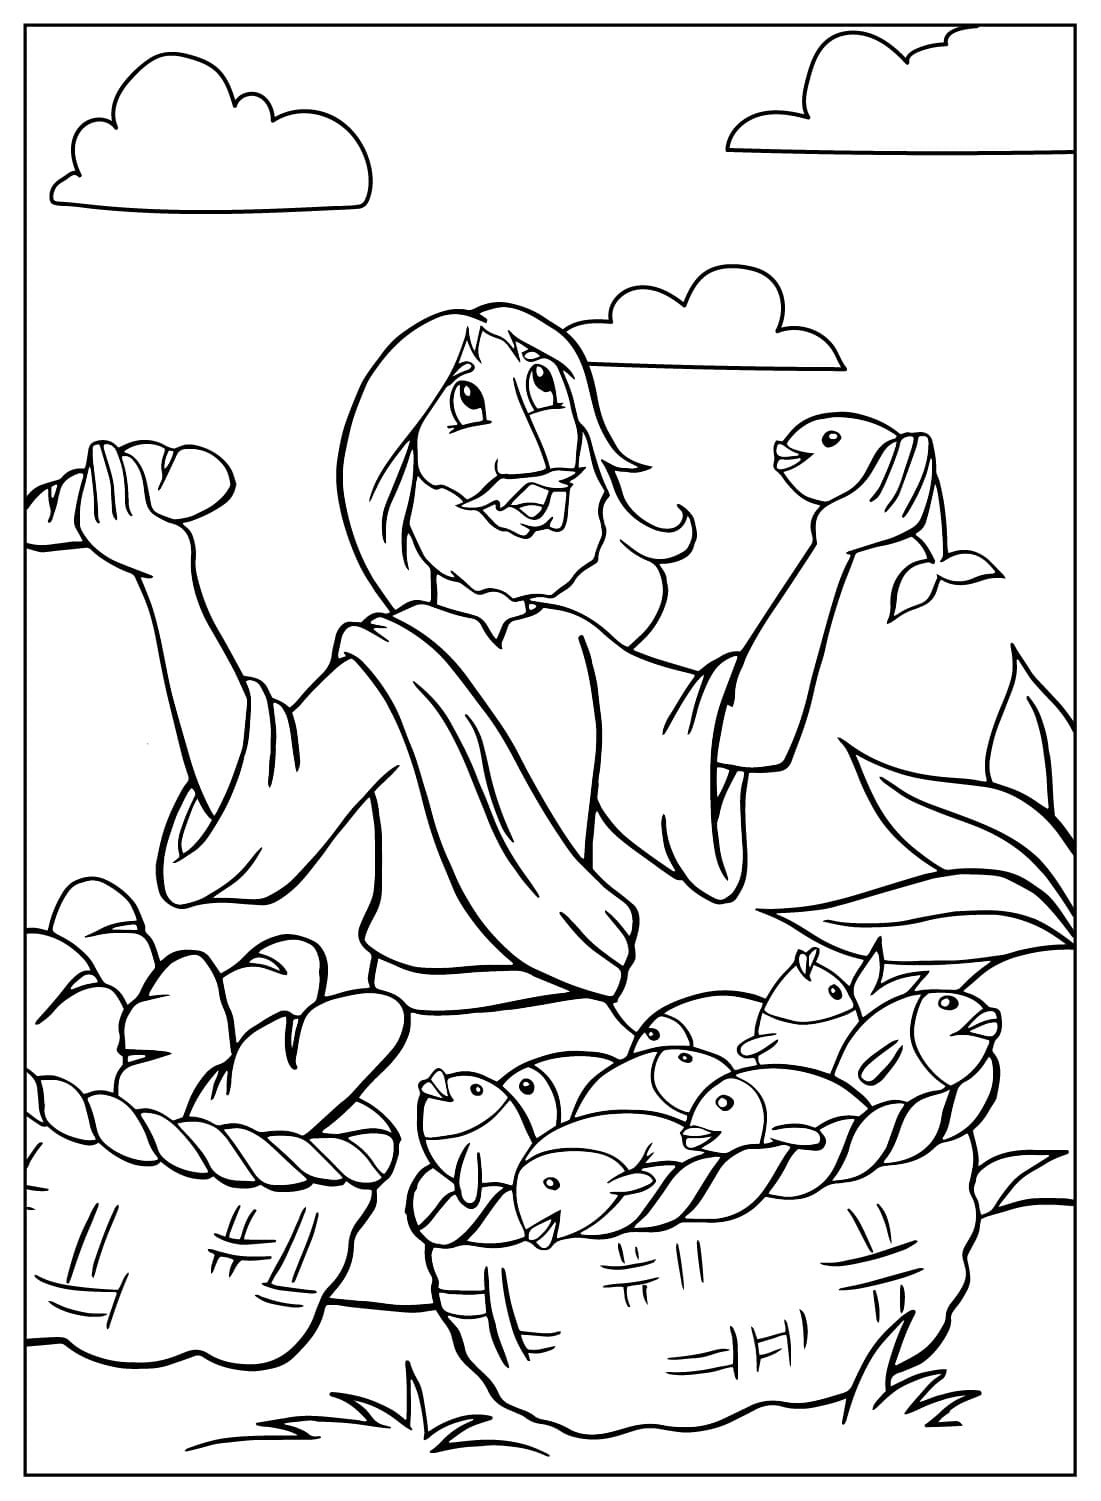 Jesus Multiplied the Loaves Coloring Sheet from Jesus